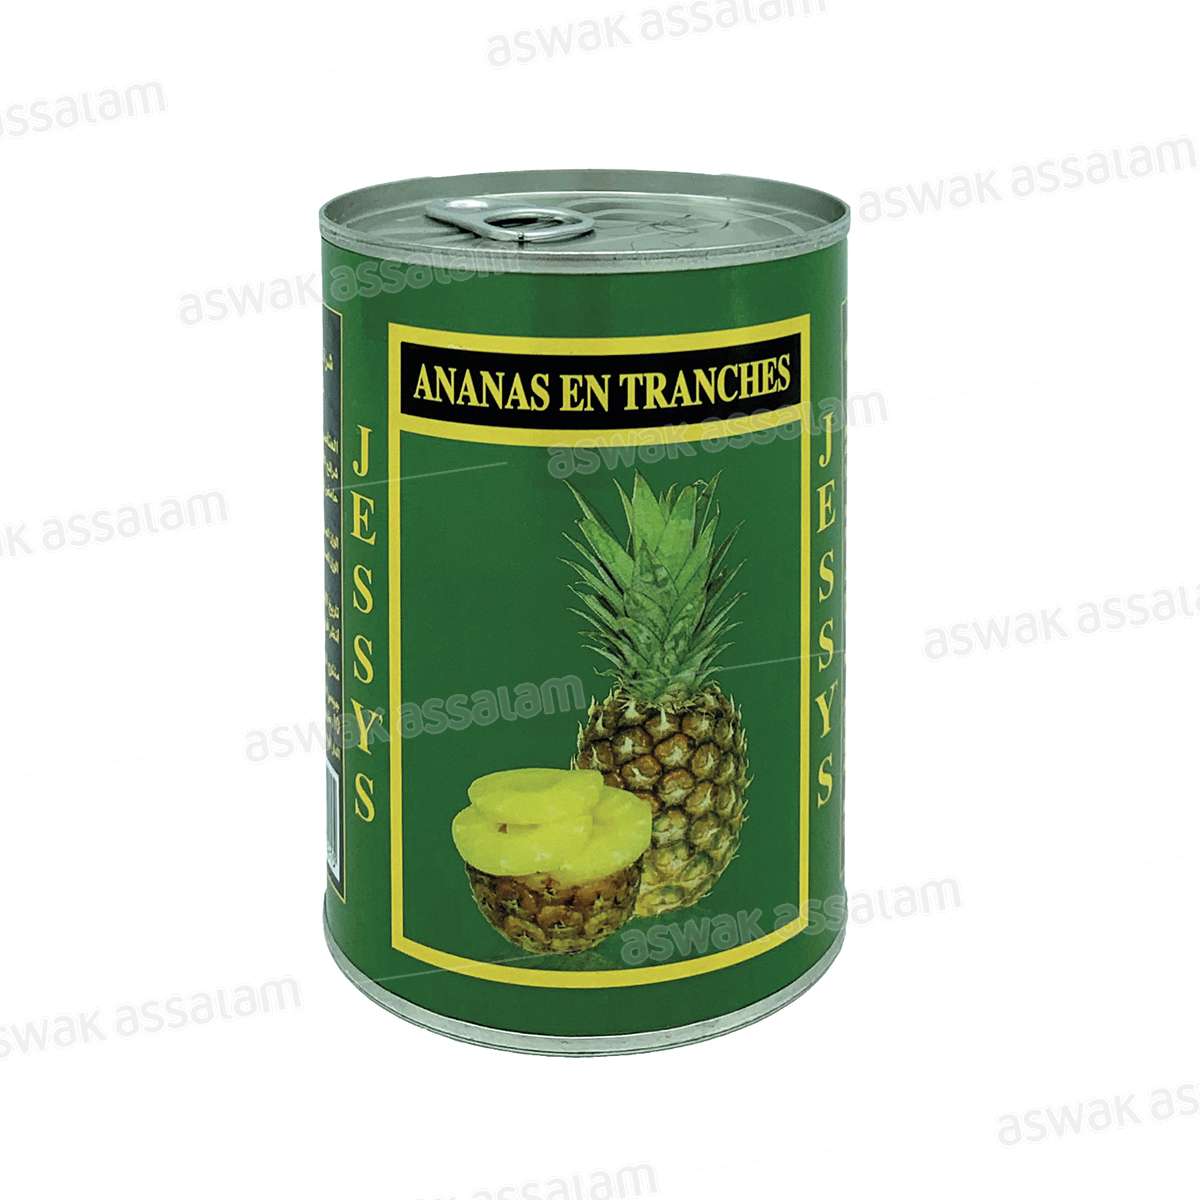 ANANAS EN TRANCHES 565G JESSY'S